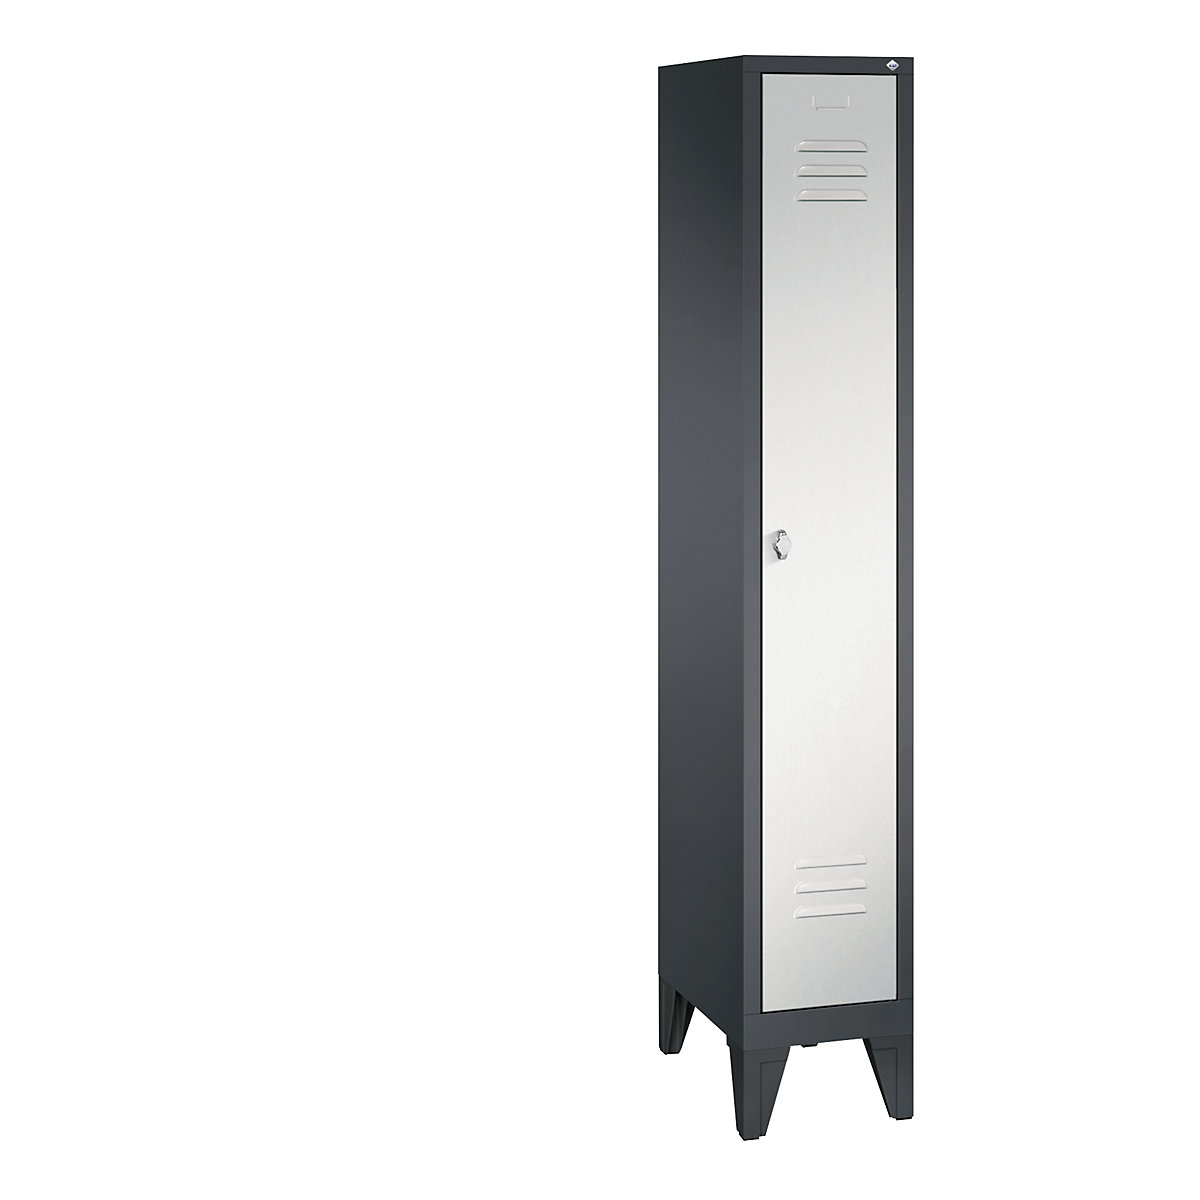 CLASSIC cloakroom locker with feet – C+P, 1 compartment, compartment width 300 mm, black grey / light grey-14